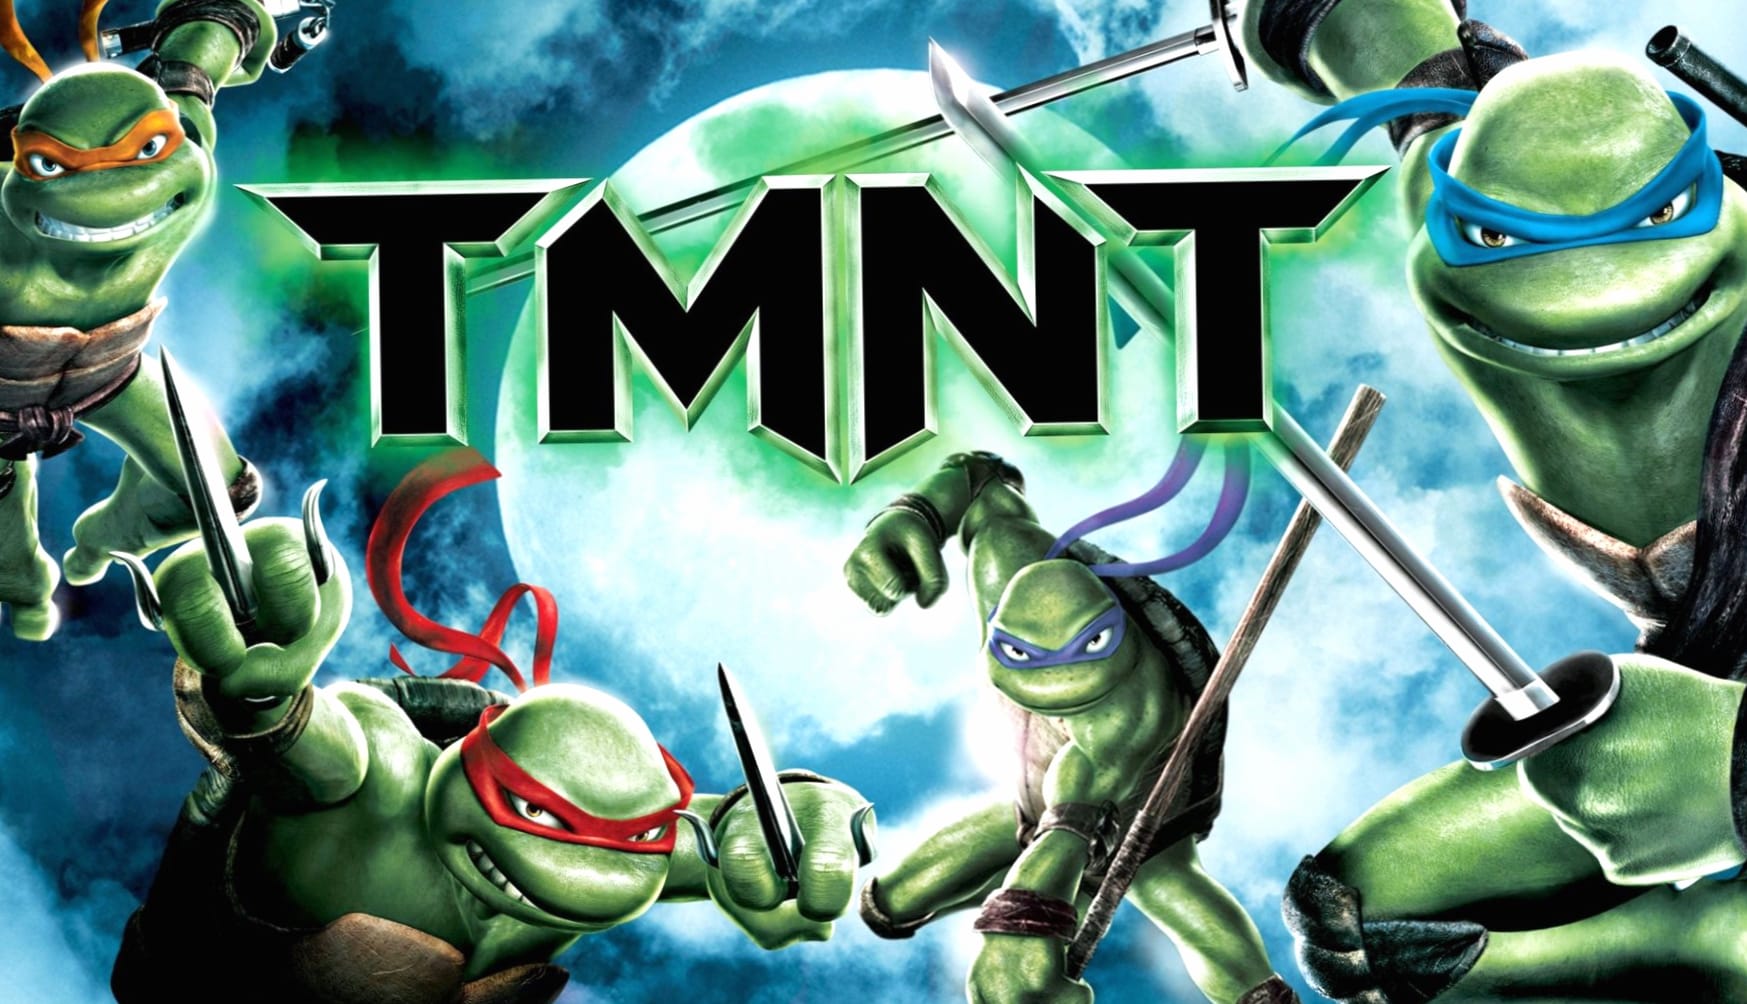 TMNT (2007) wallpapers HD quality